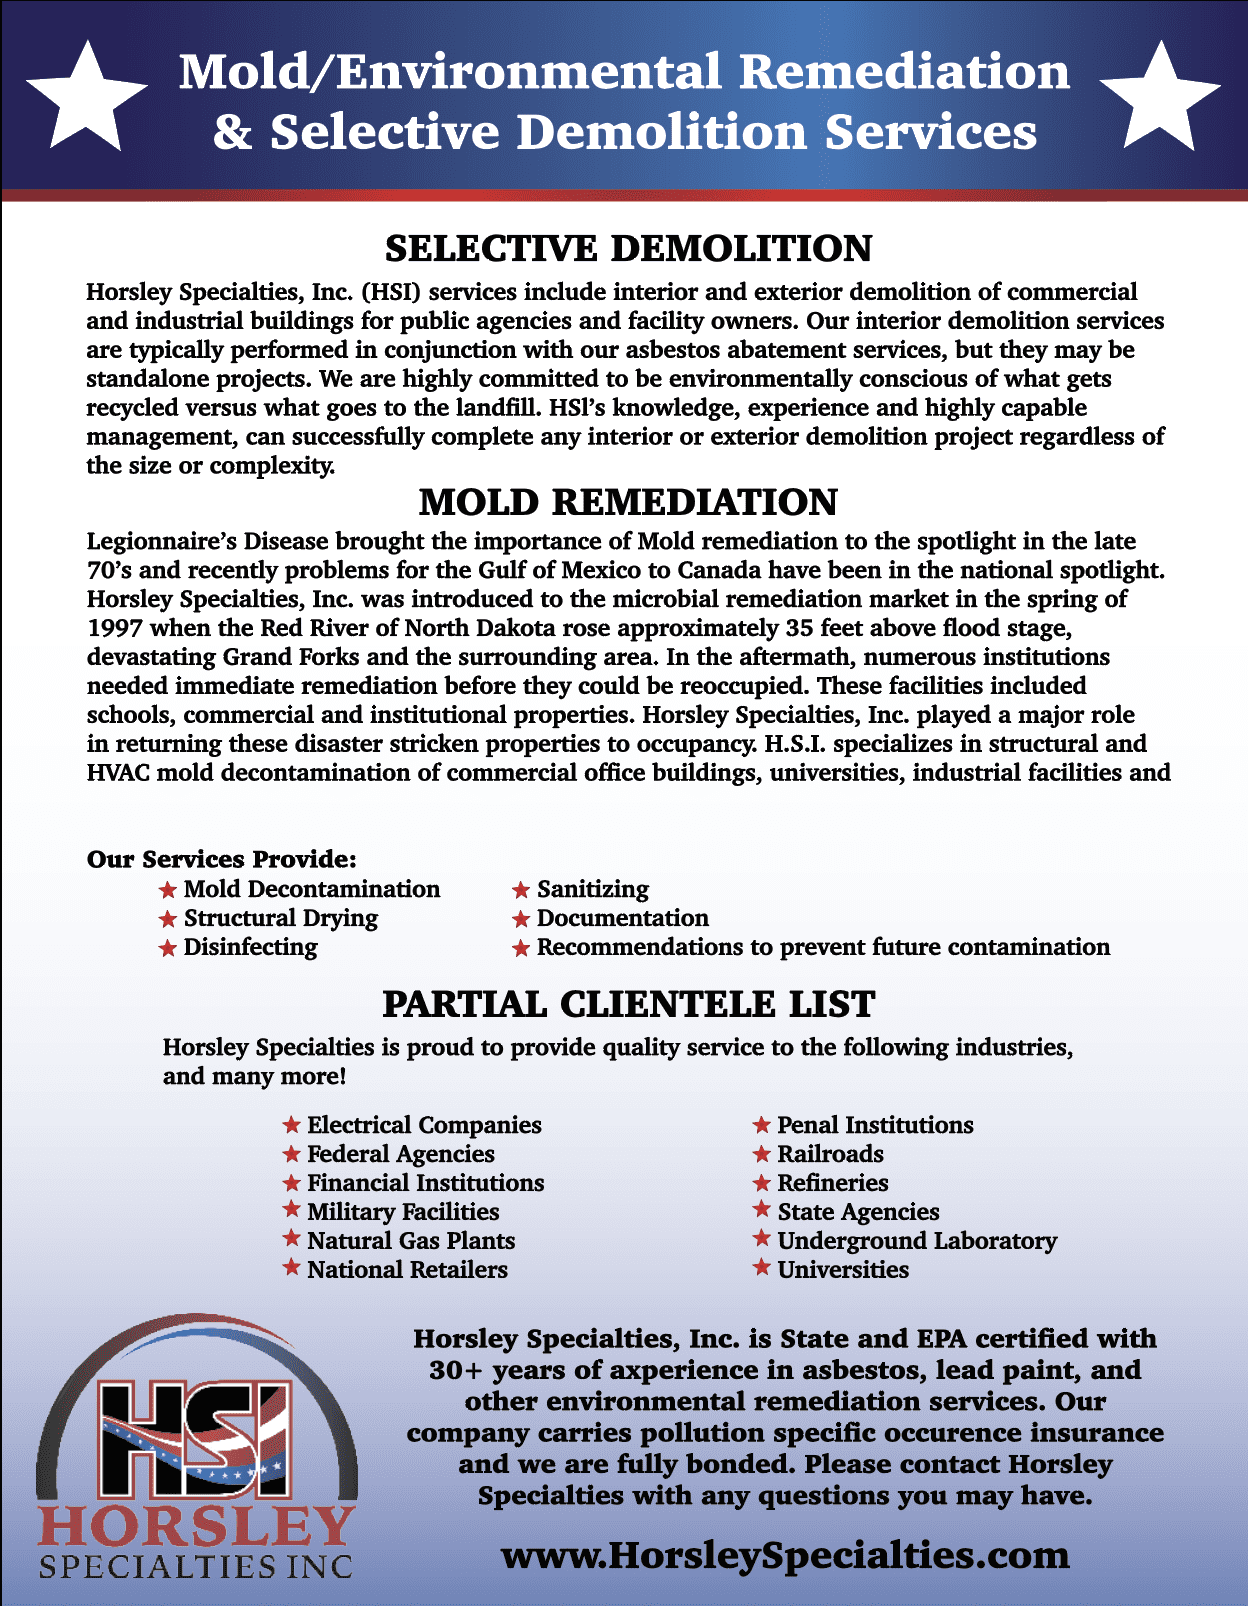 mold/environmental remediation and selective demolition services flyer